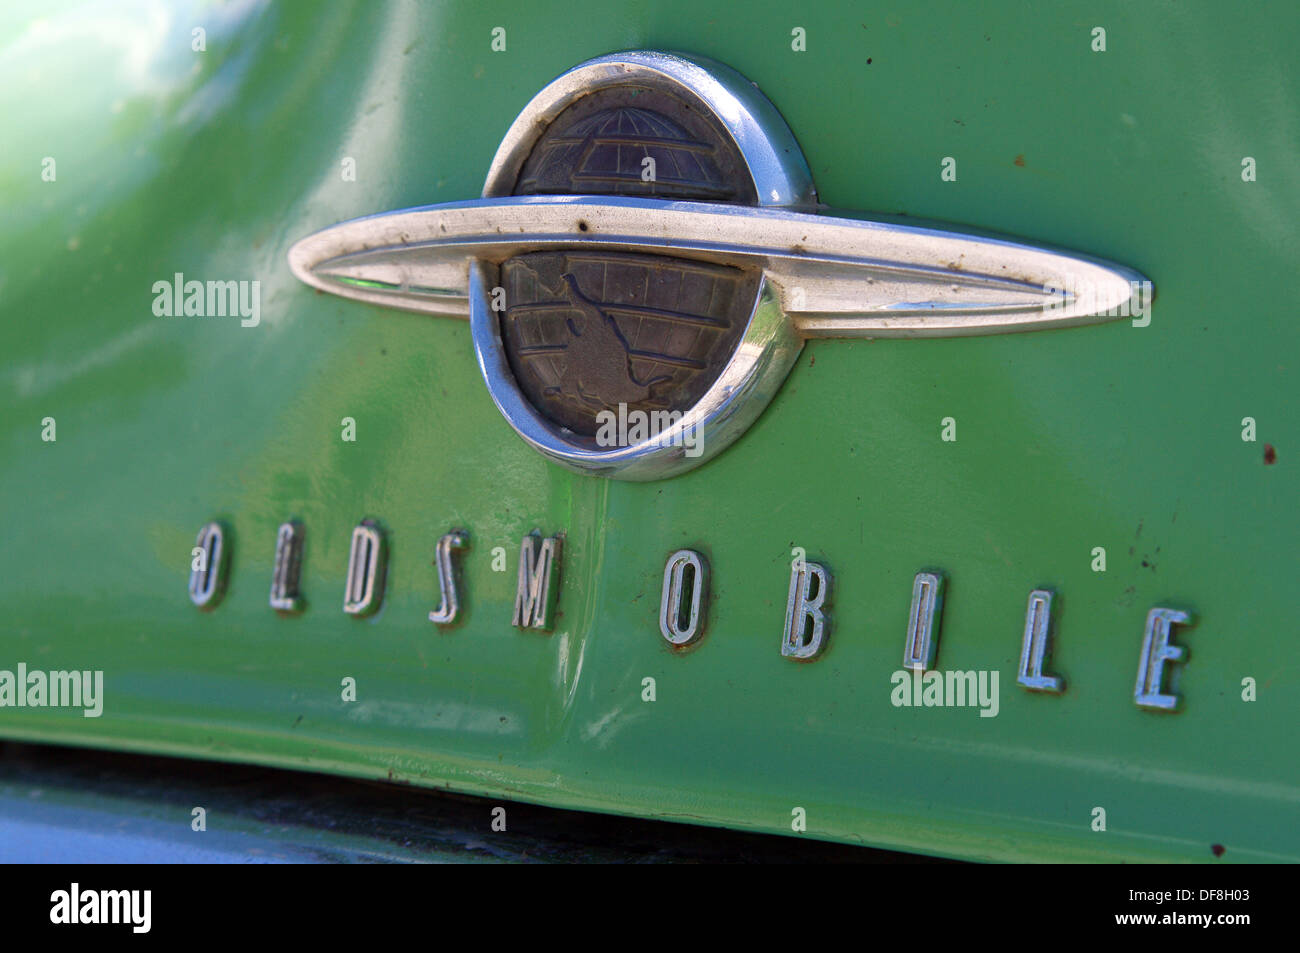 Logo of a vintage Oldsmobile in Cuba Stock Photo